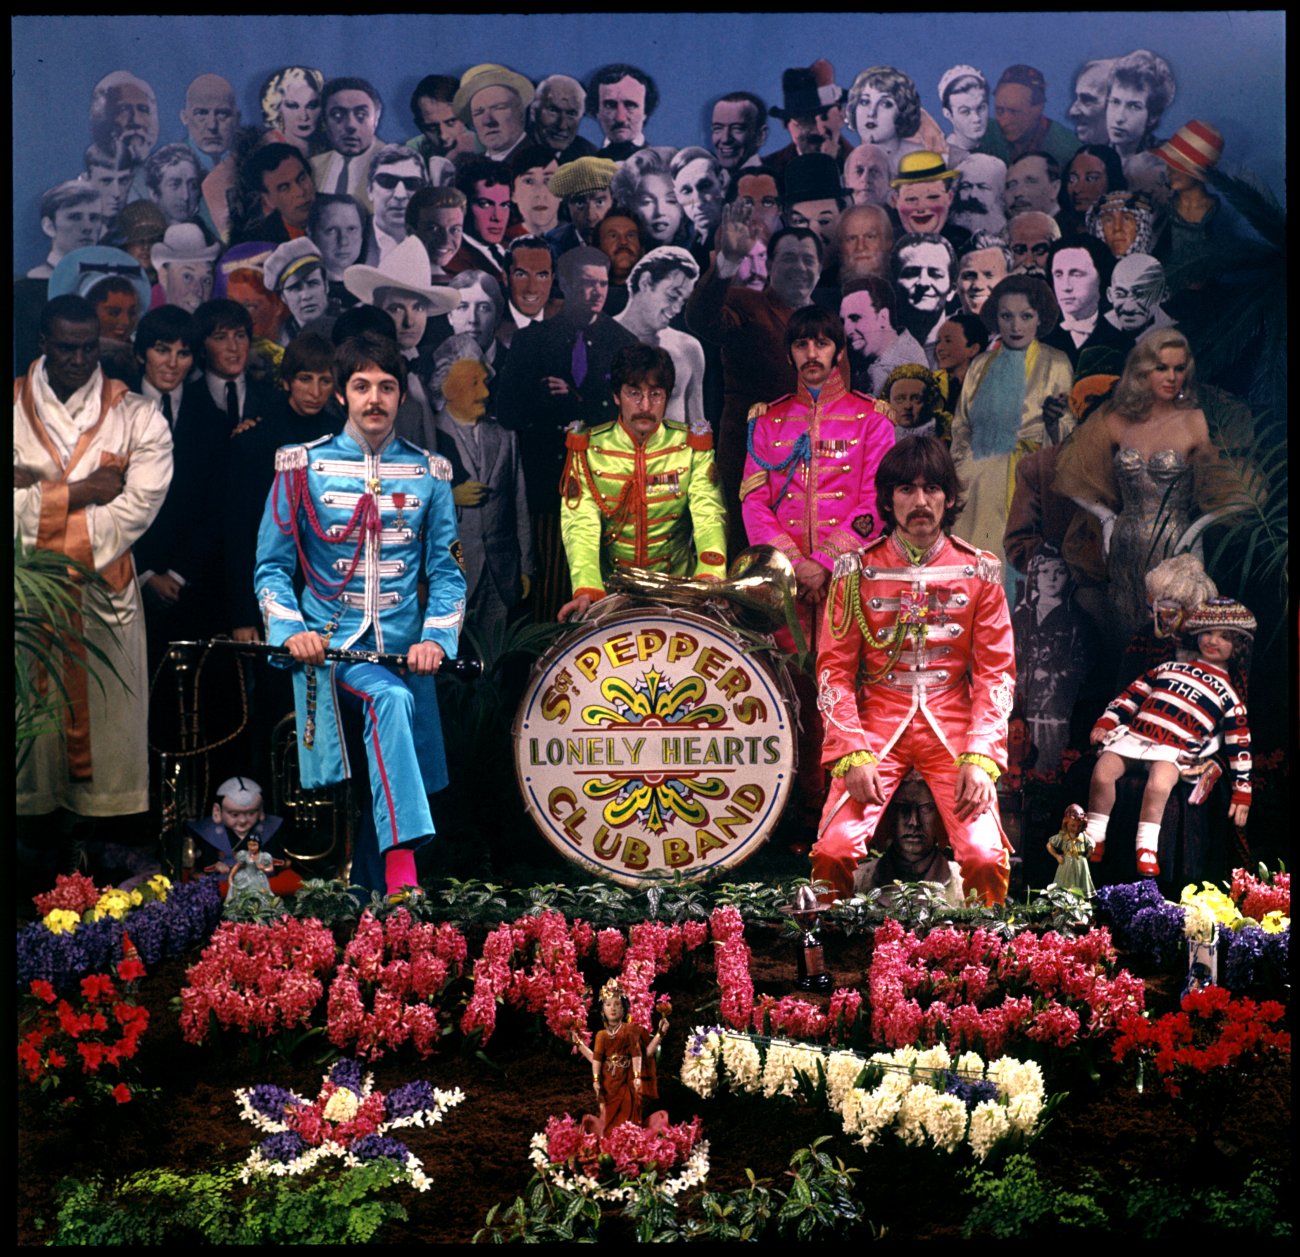 Outtake from the cover shoot for Sgt Pepper